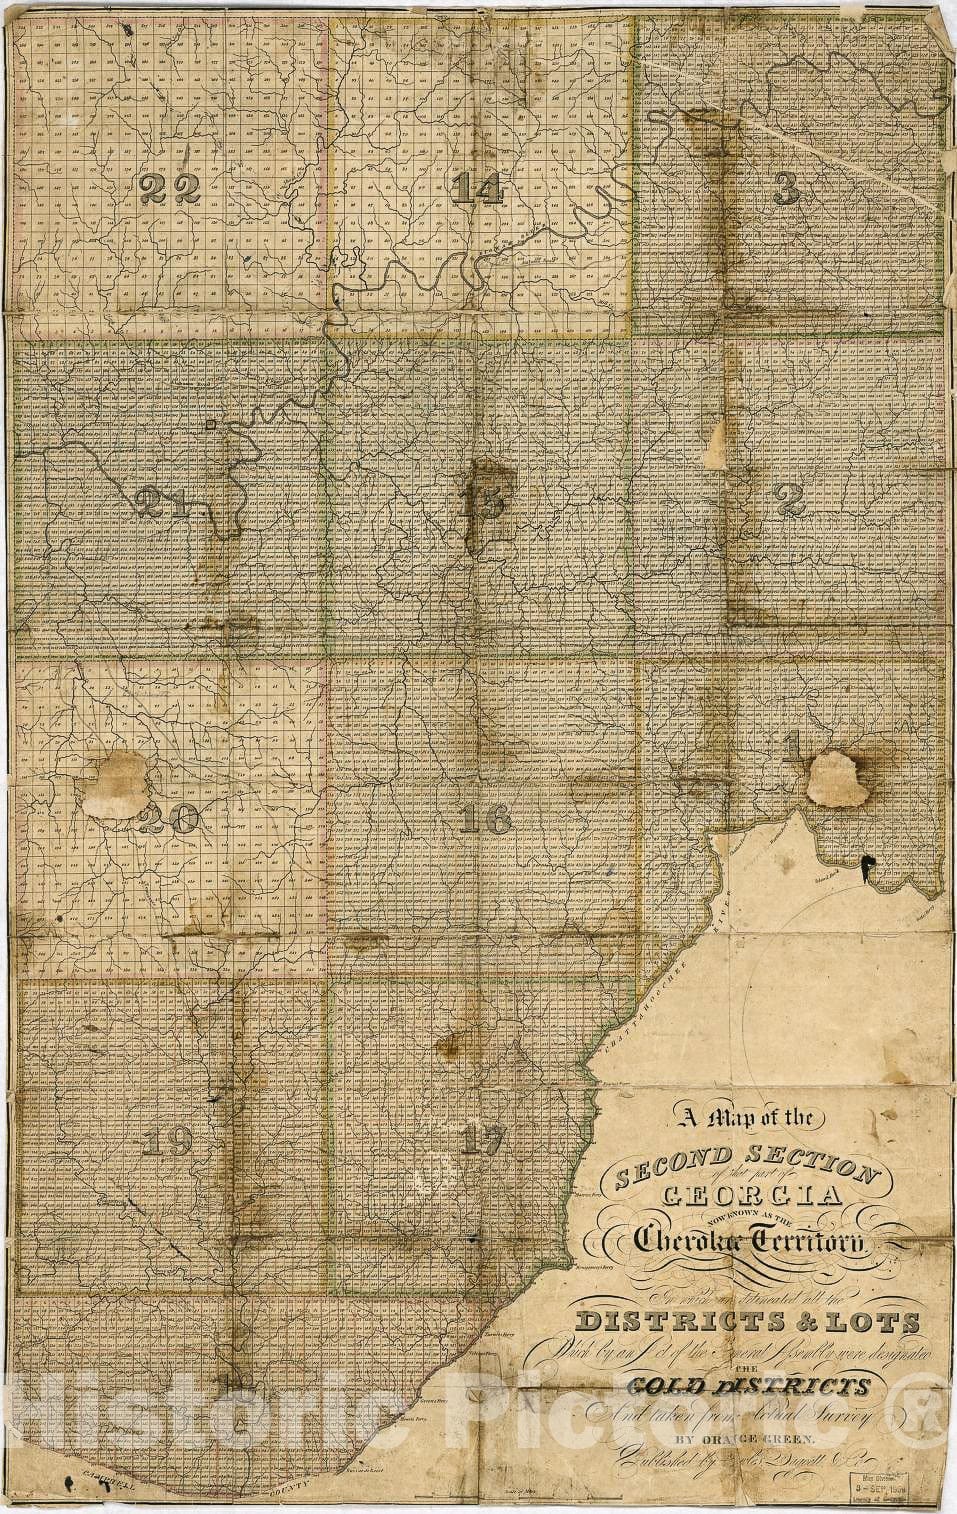 Historic 1830 Map - A map of The Second Section of That Part of Georgia Now Known as The Cherokee Territory in which are delineated All The districts